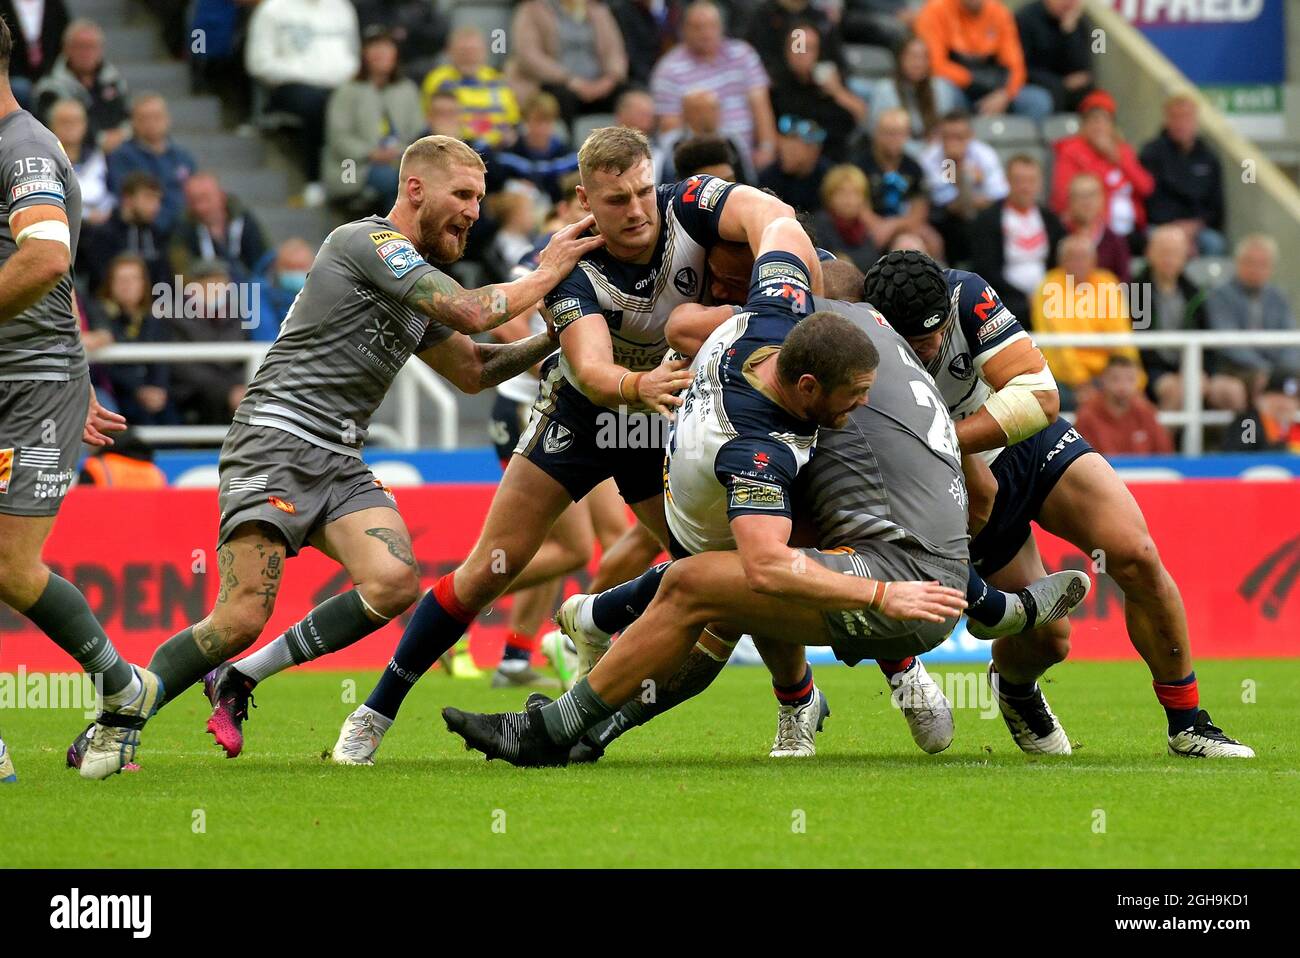 Dacia Magic Weekend September 2021, Super League Rugby, Catalans Dragons, clash against St Helens, St James Park stadium, Newcastle. UK Stock Photo